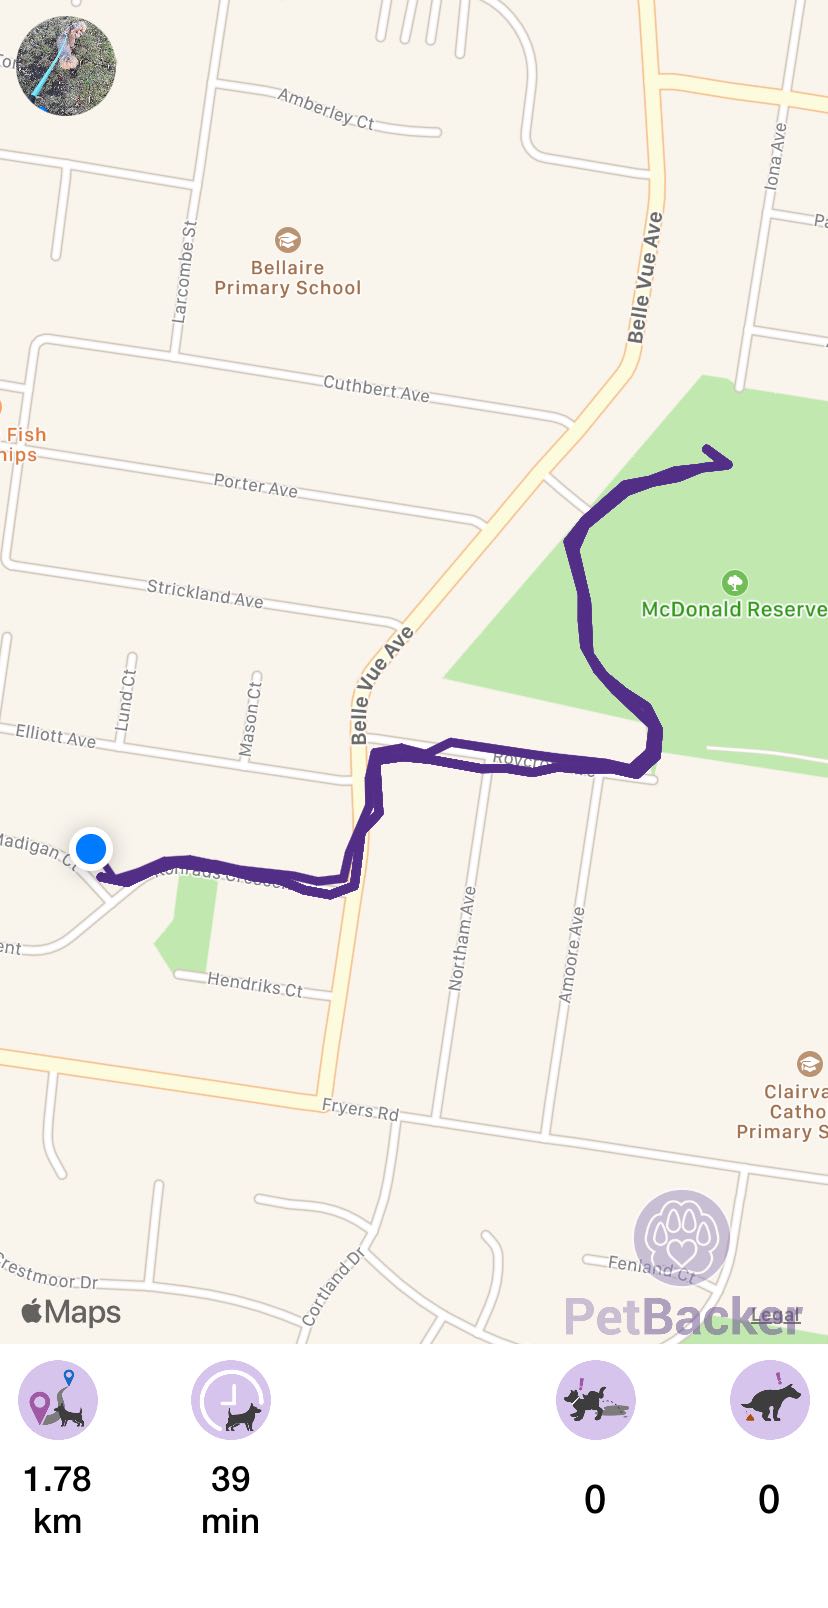 Just completed pet walking of 1.78 km